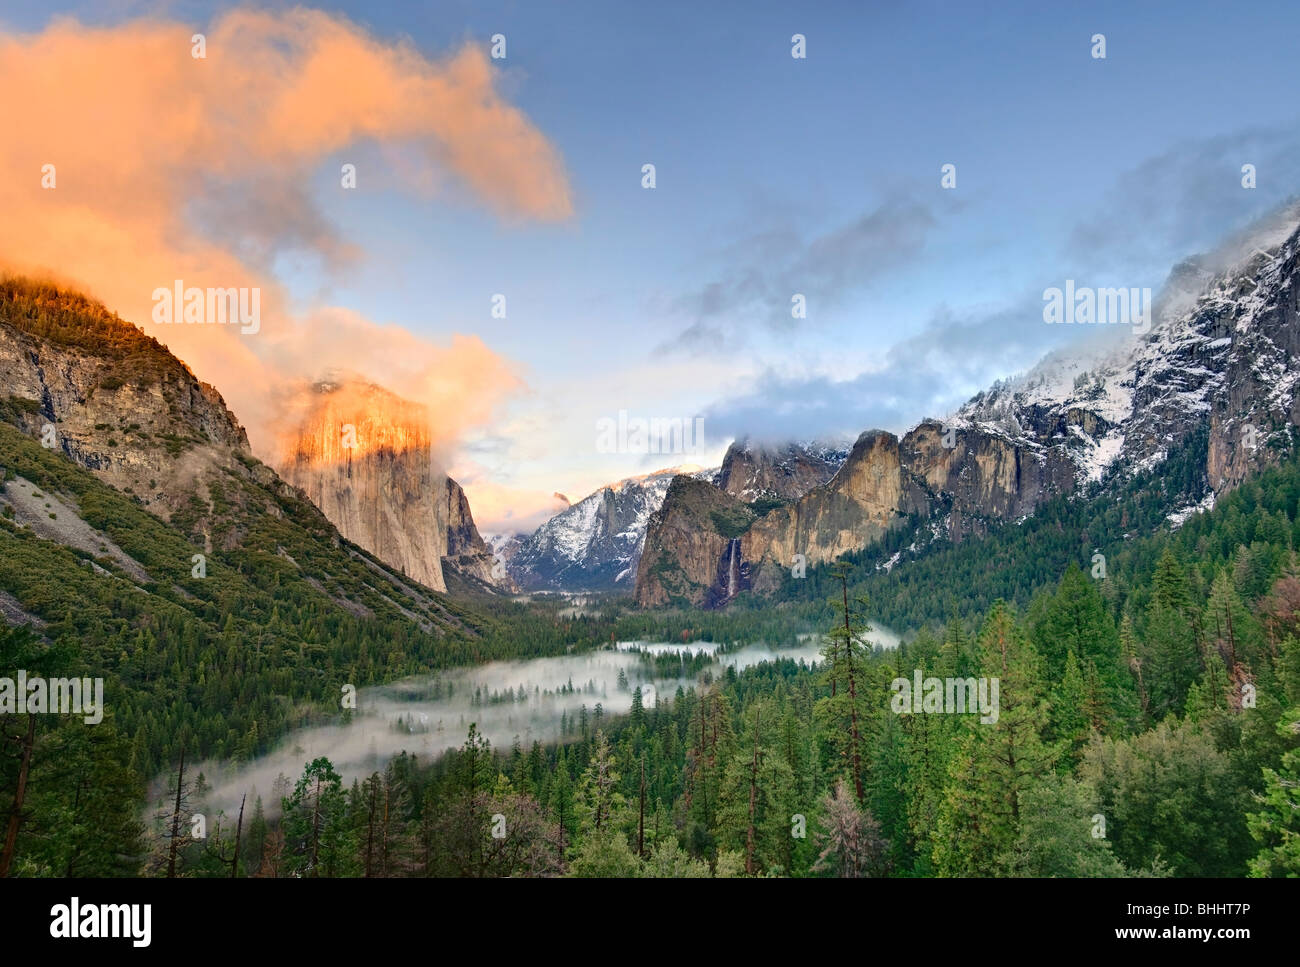 Dramatic view of Yosemite from Tunnel View. Stock Photo